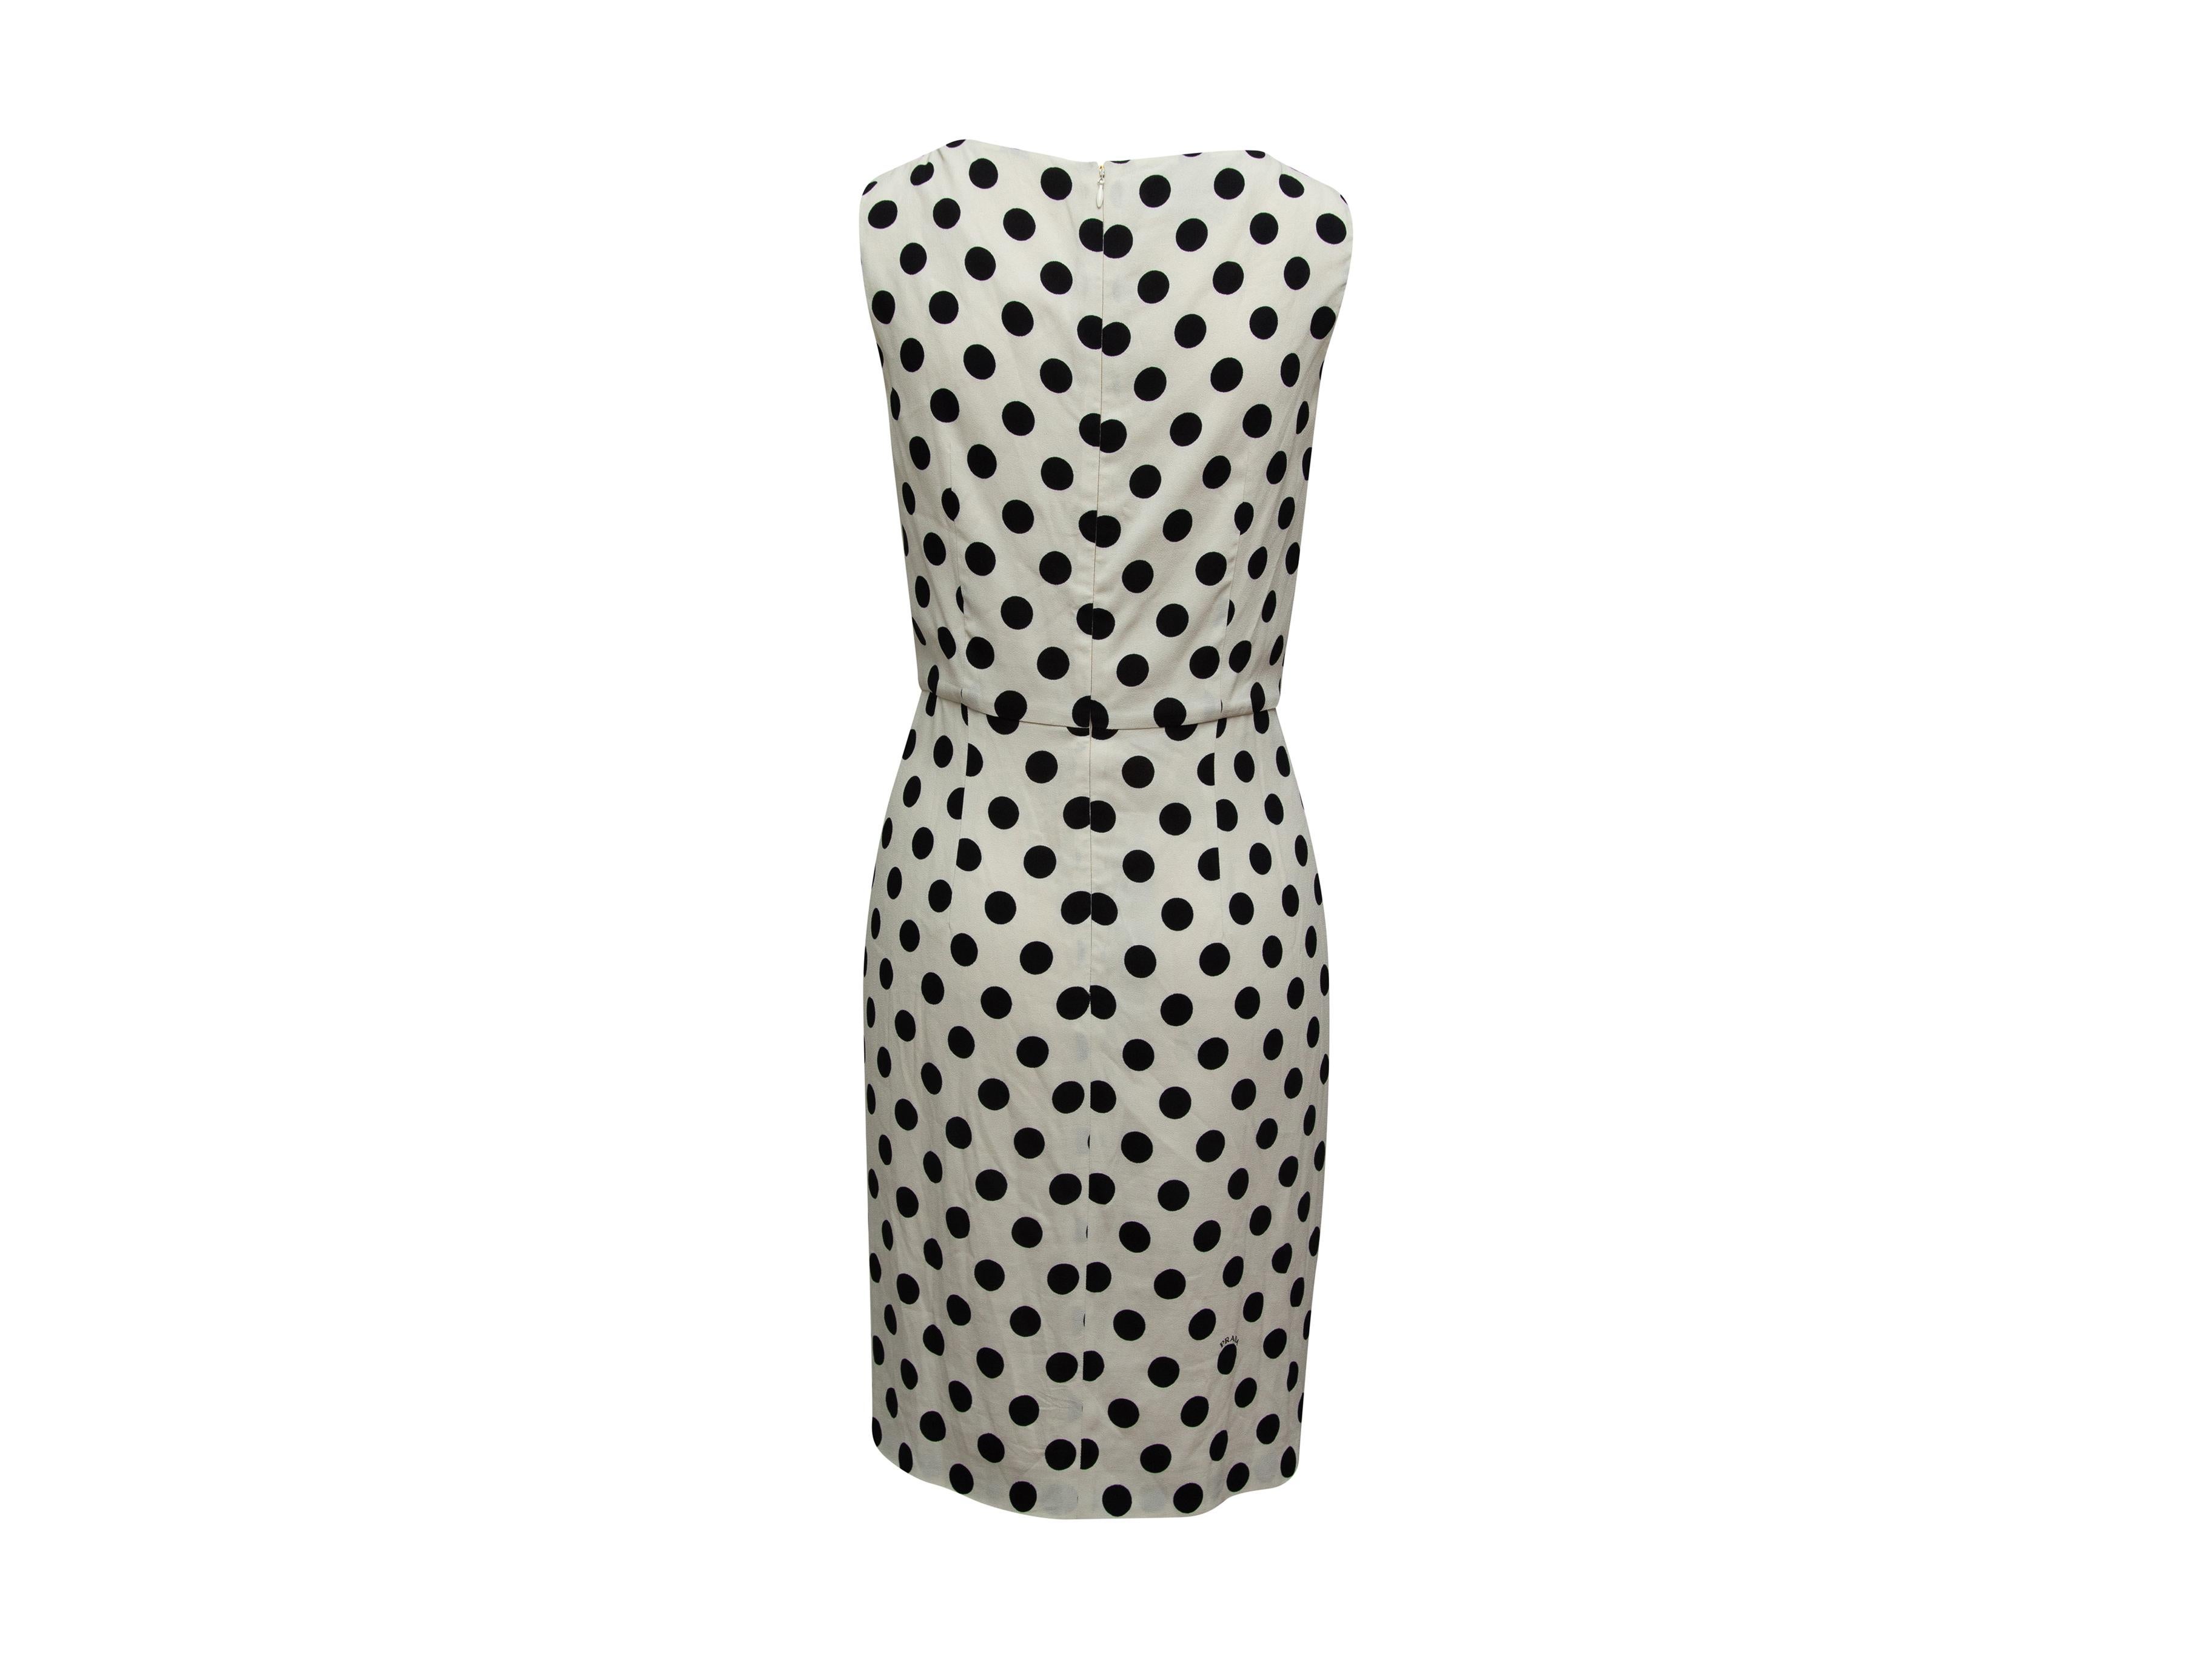 Product details: White and black sleeveless dress by Prada. Polka dot print throughout. Boat neck. Gathering at hips. Zip closure at center back. Designer size 42. 36